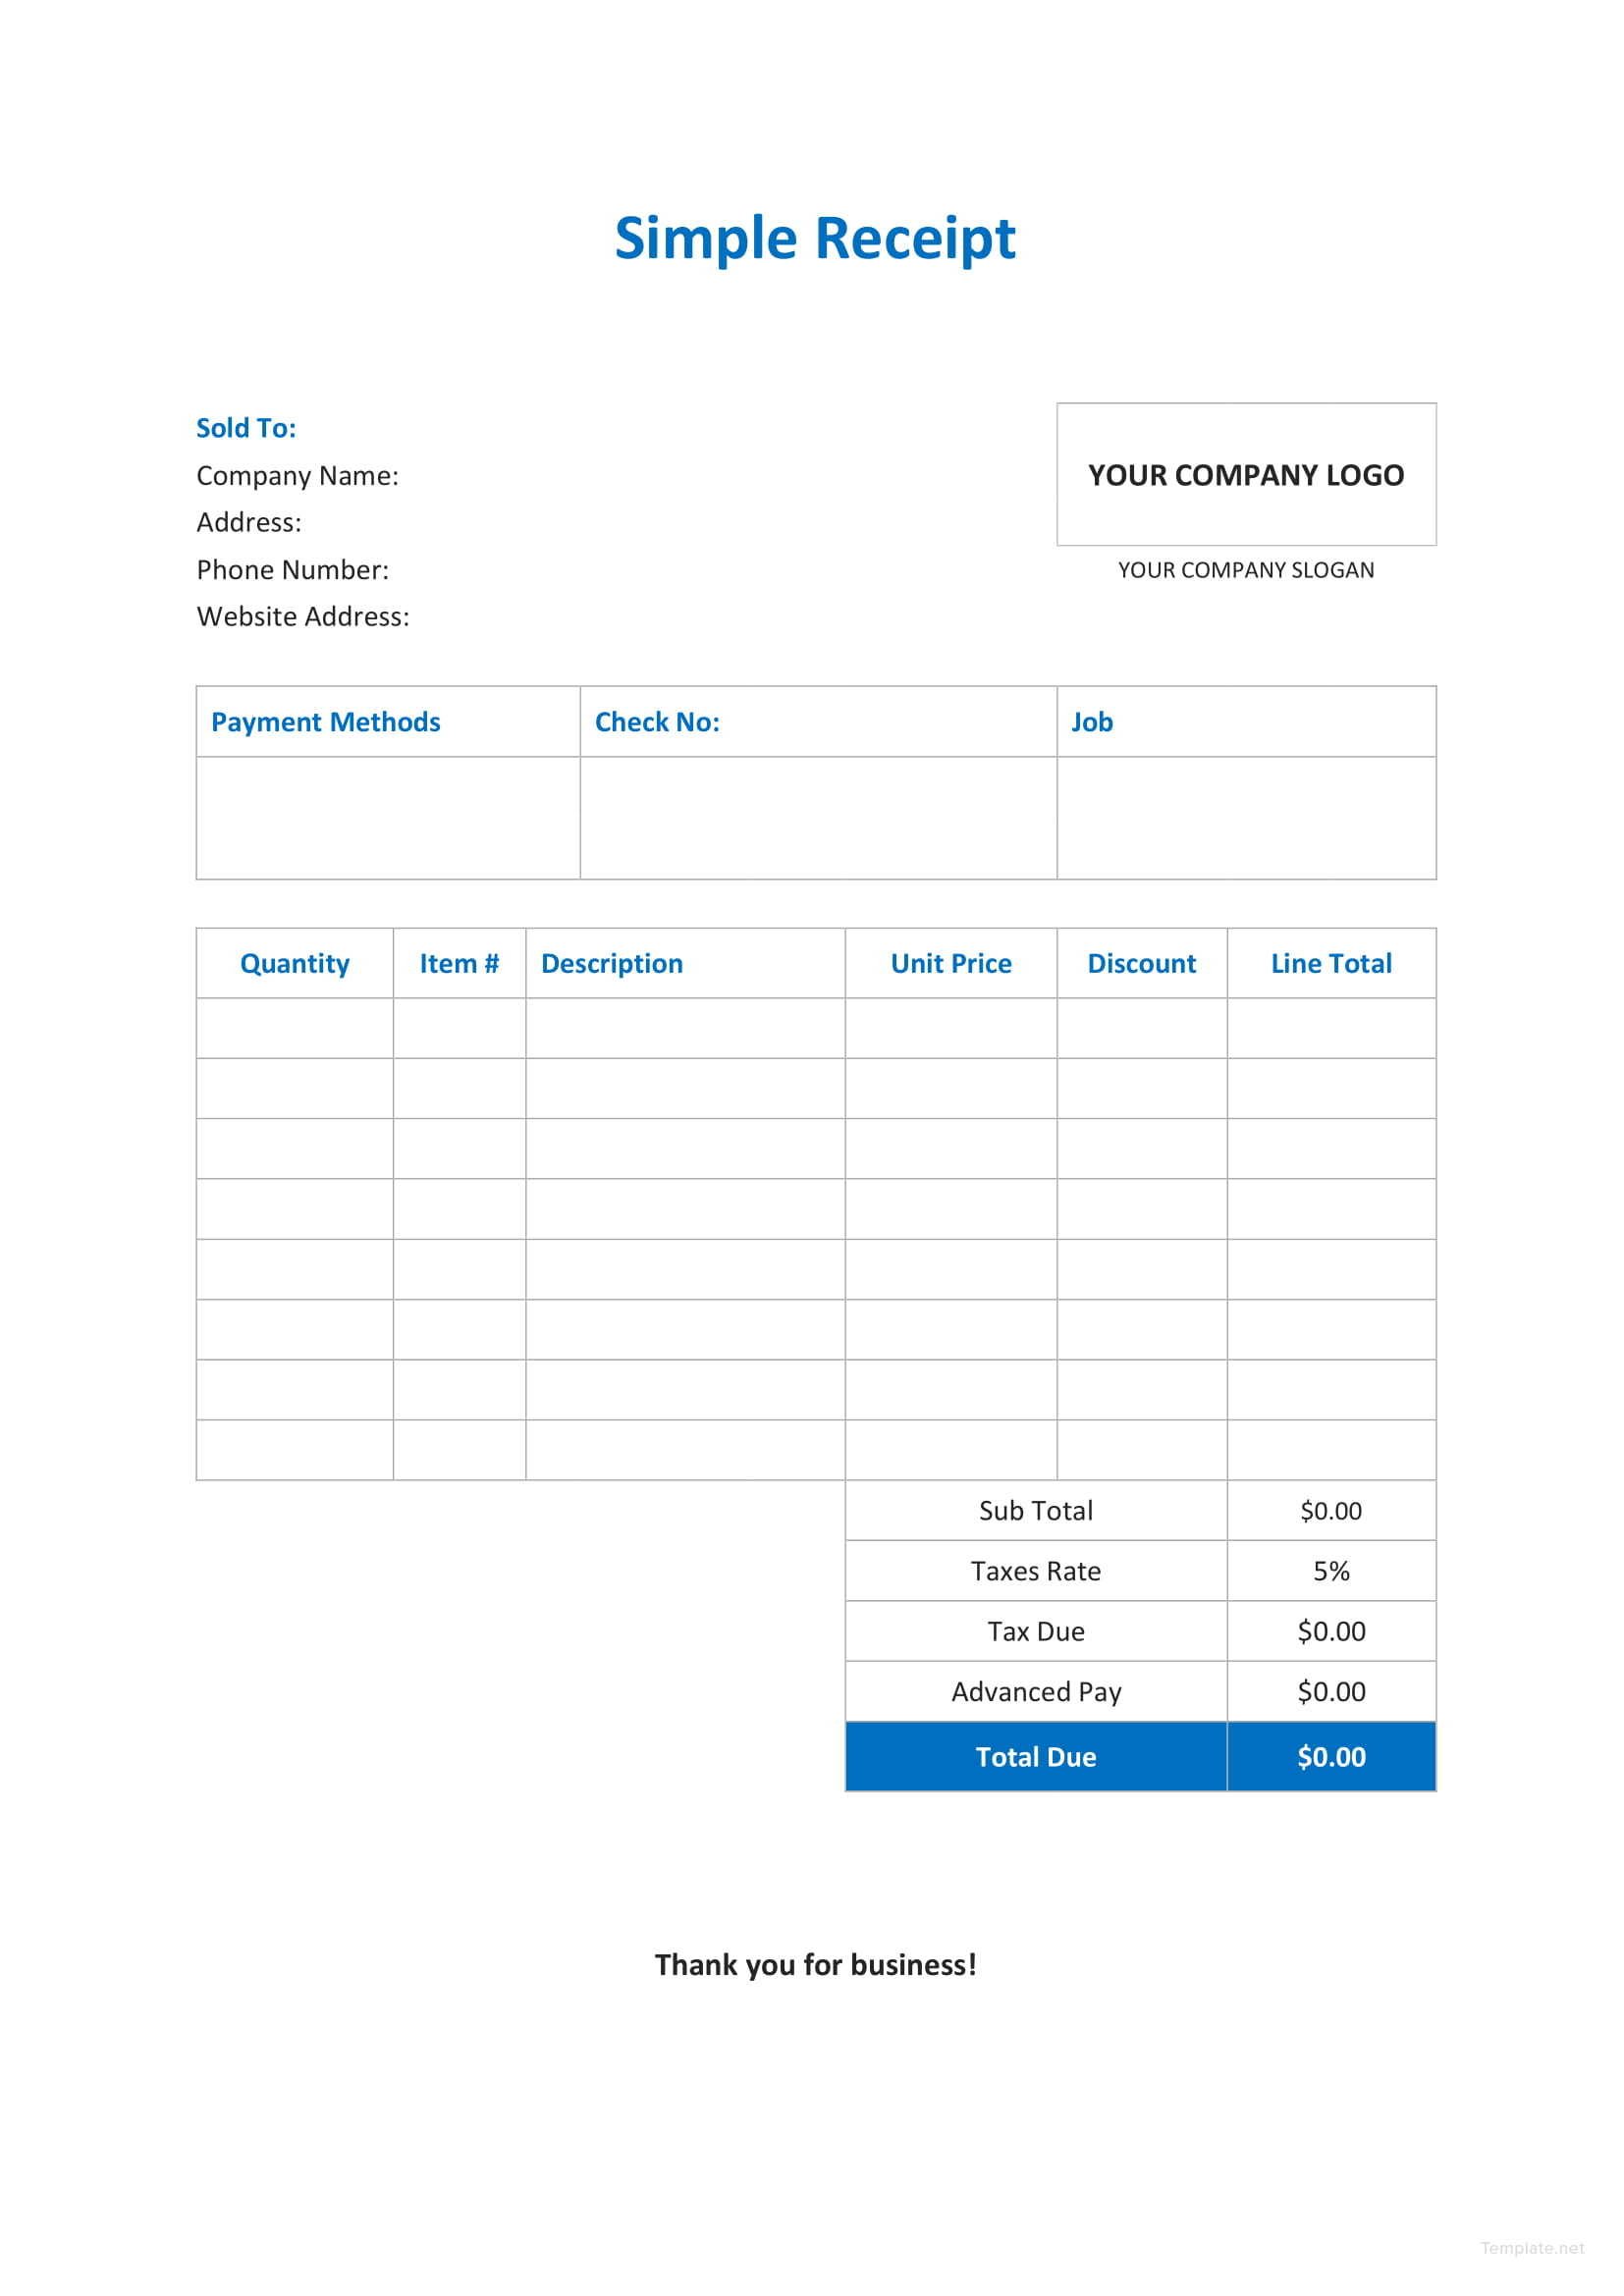 Simple Receipt Template in Microsoft Word, Excel